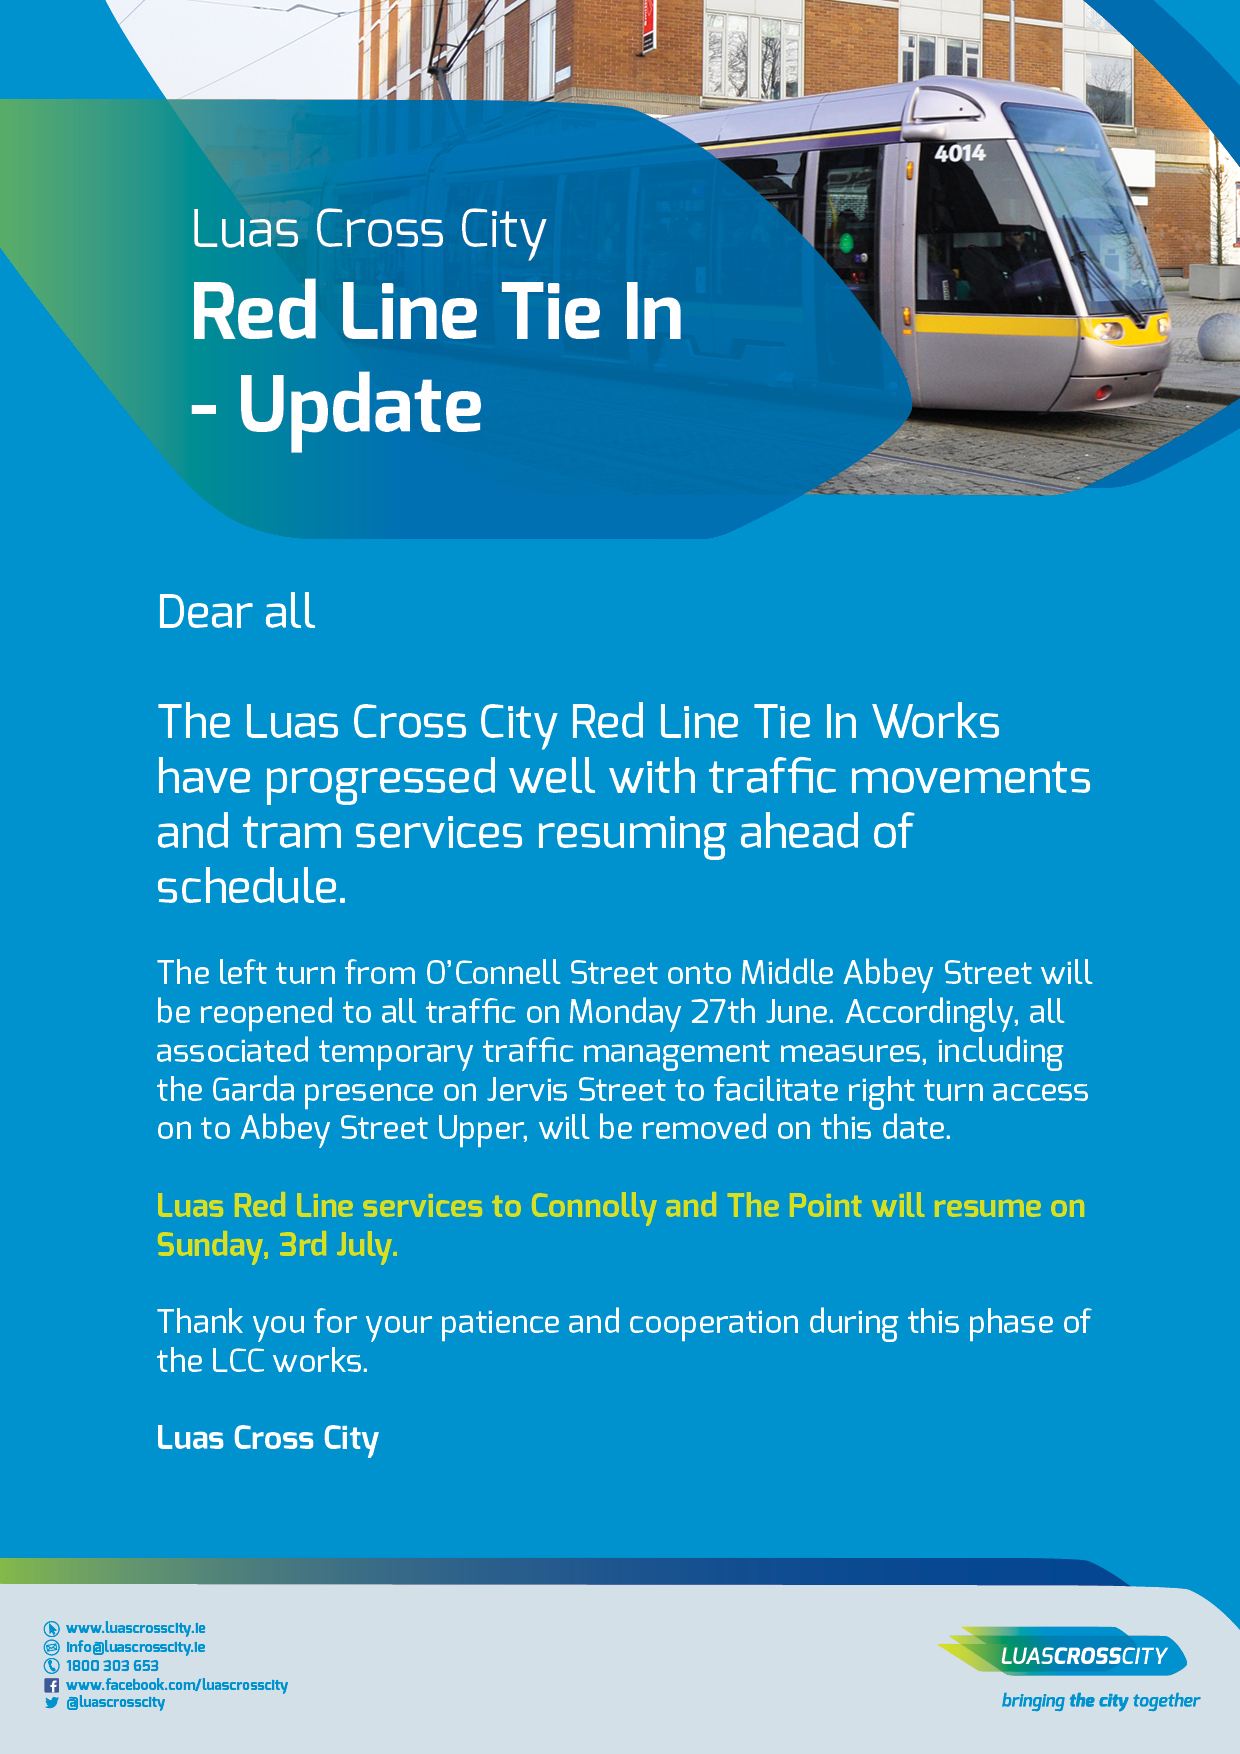 The Luas Cross City works are progressing well and as a result traffic movements and tram services east of Jervis are being restored ahead of schedule.